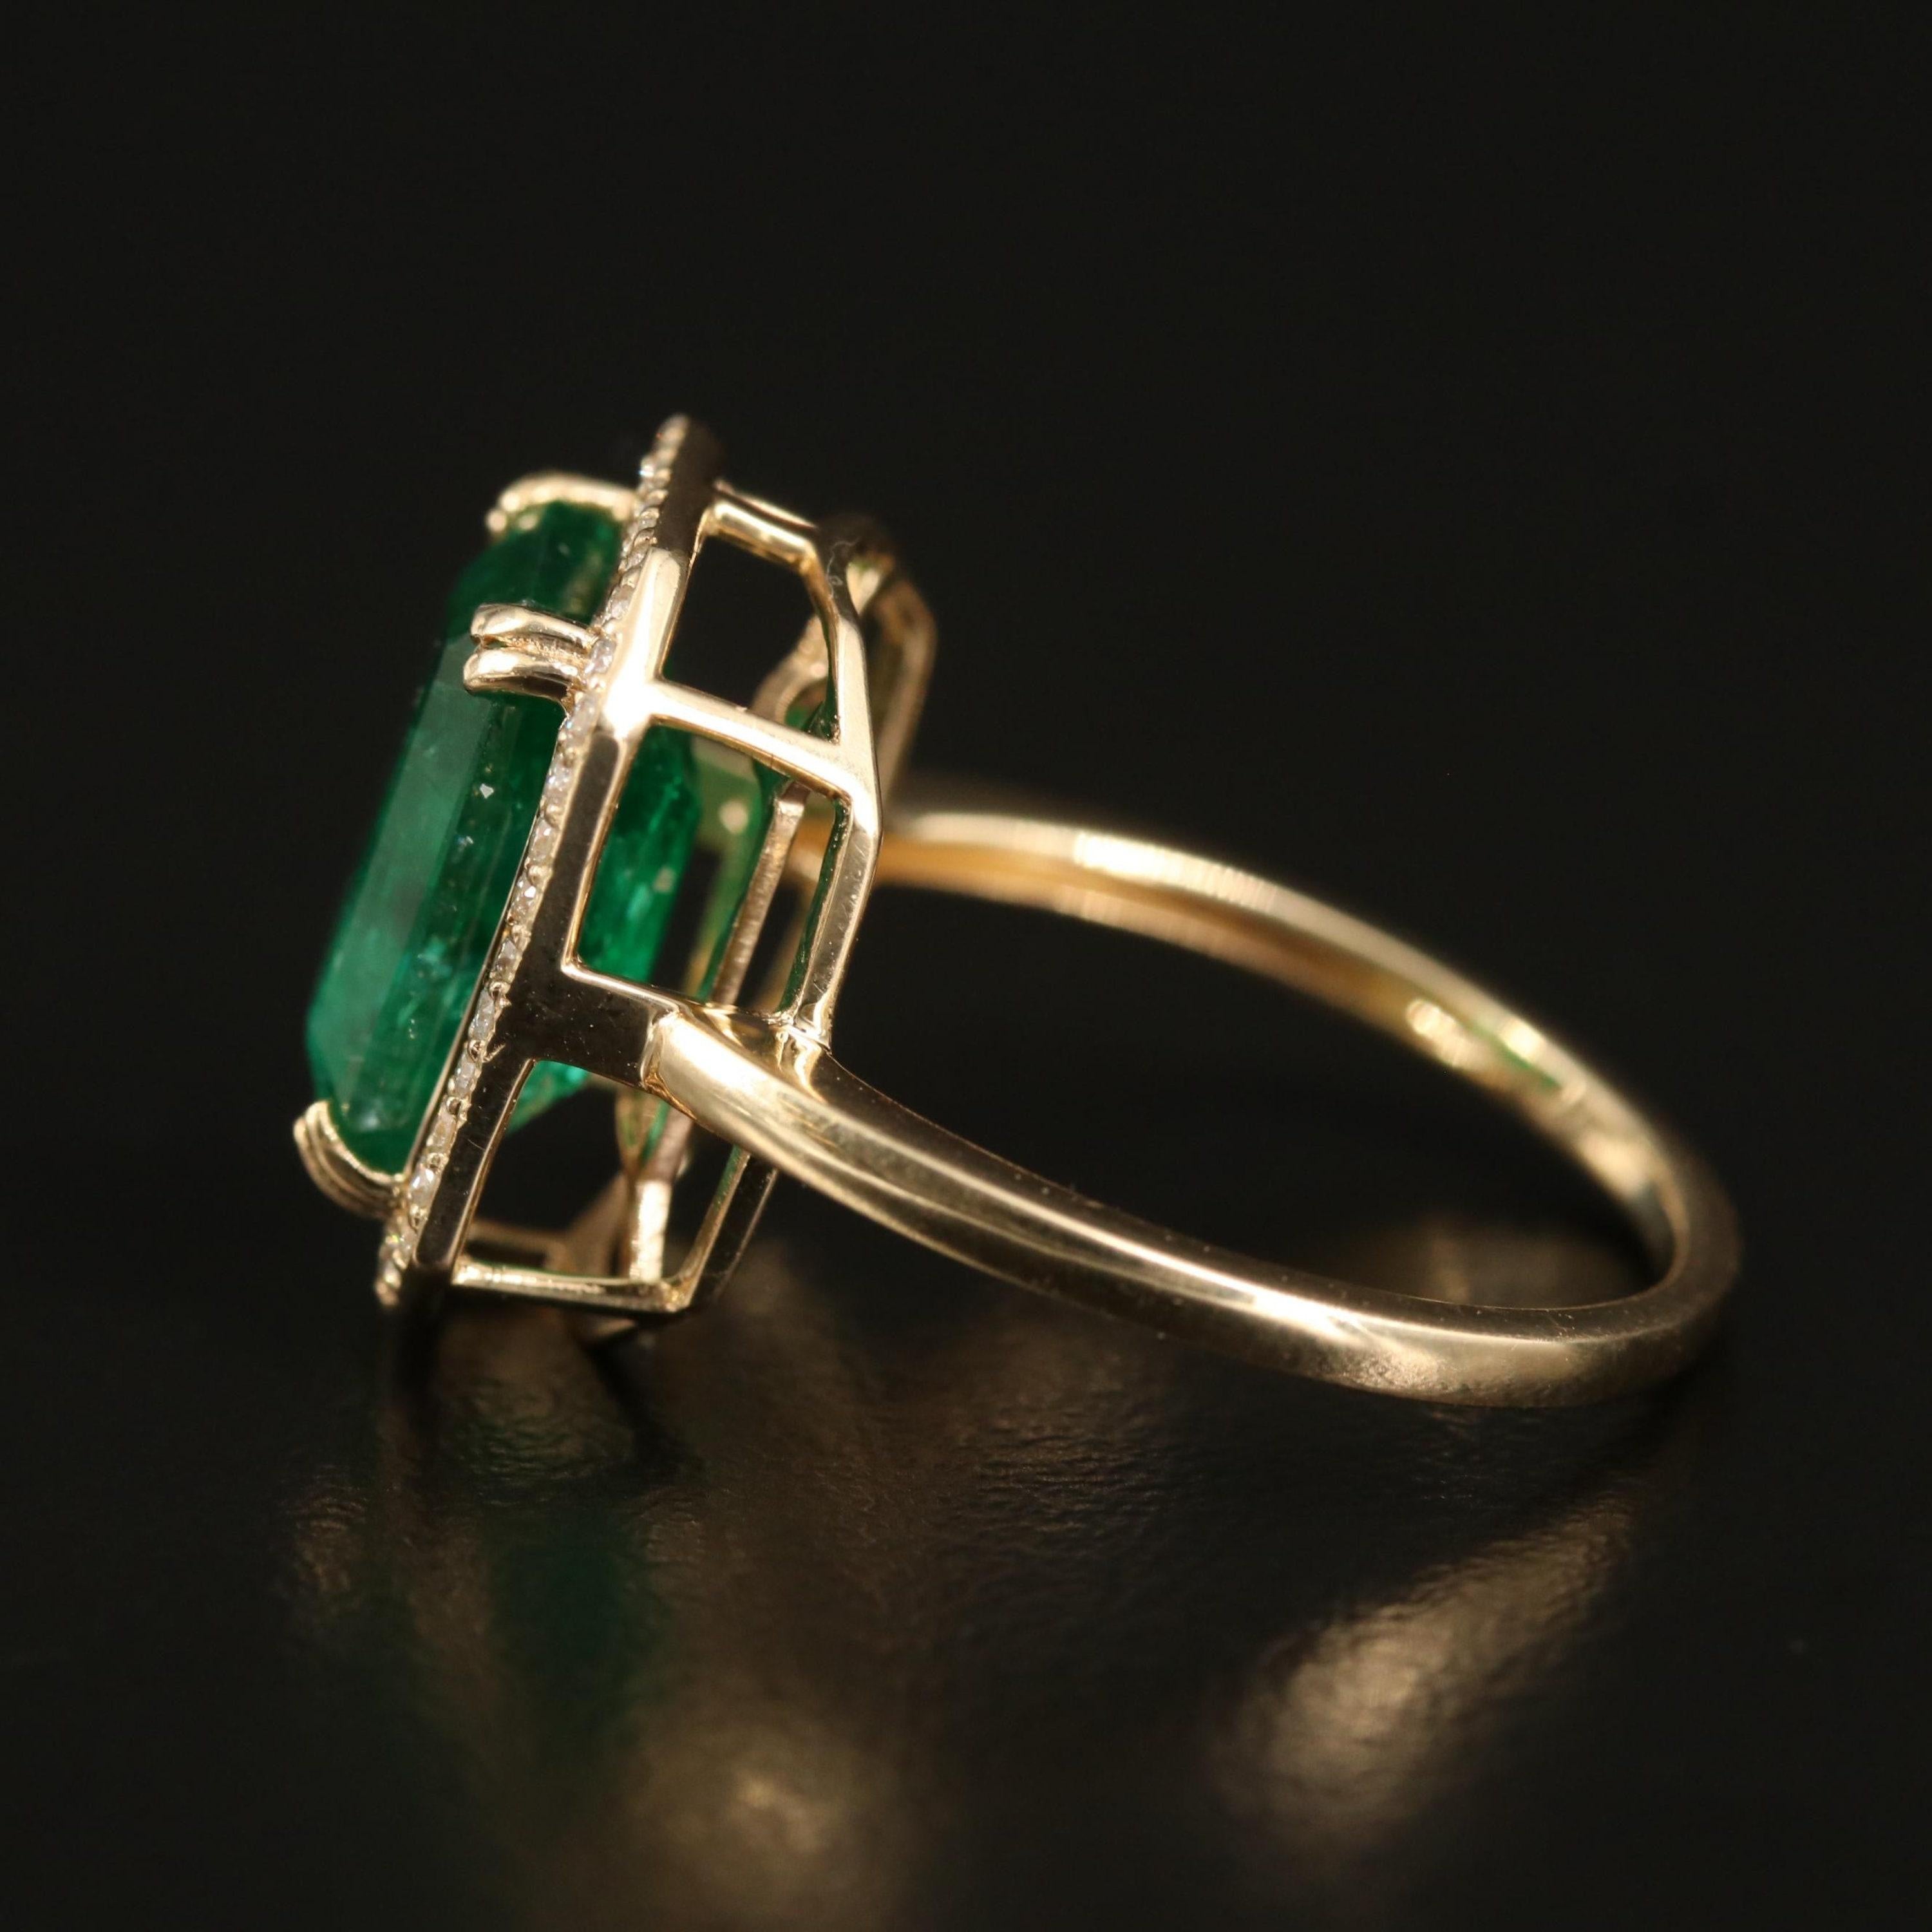 For Sale:  4 Carat Natural Emerald Diamond Engagement Ring Set in 18K Gold, Cocktail Ring 5